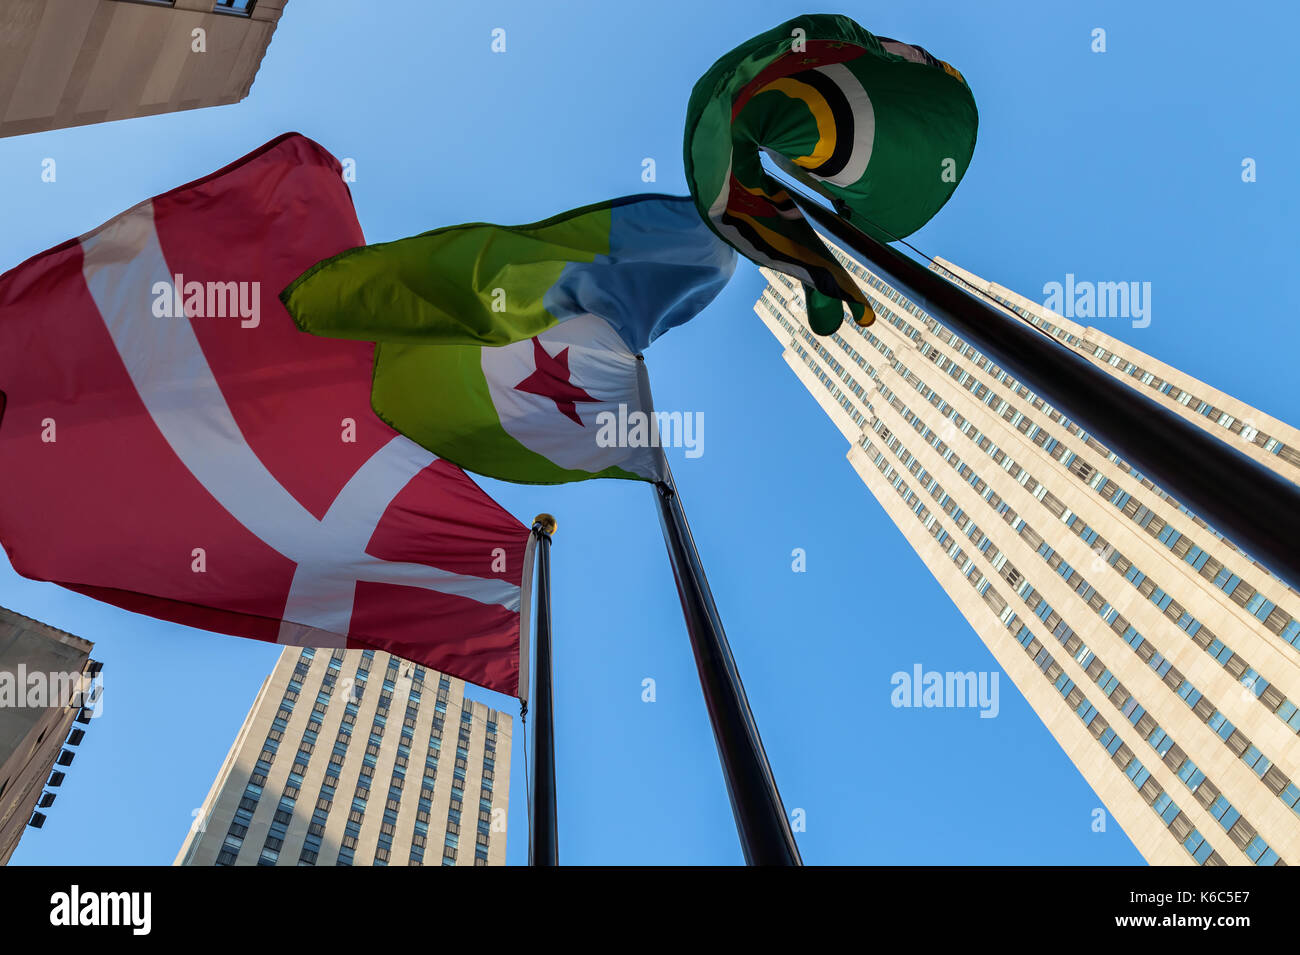 The flag of Denmark and Djibouti fly at the Rockefeller Center in New York City, New York. Stock Photo